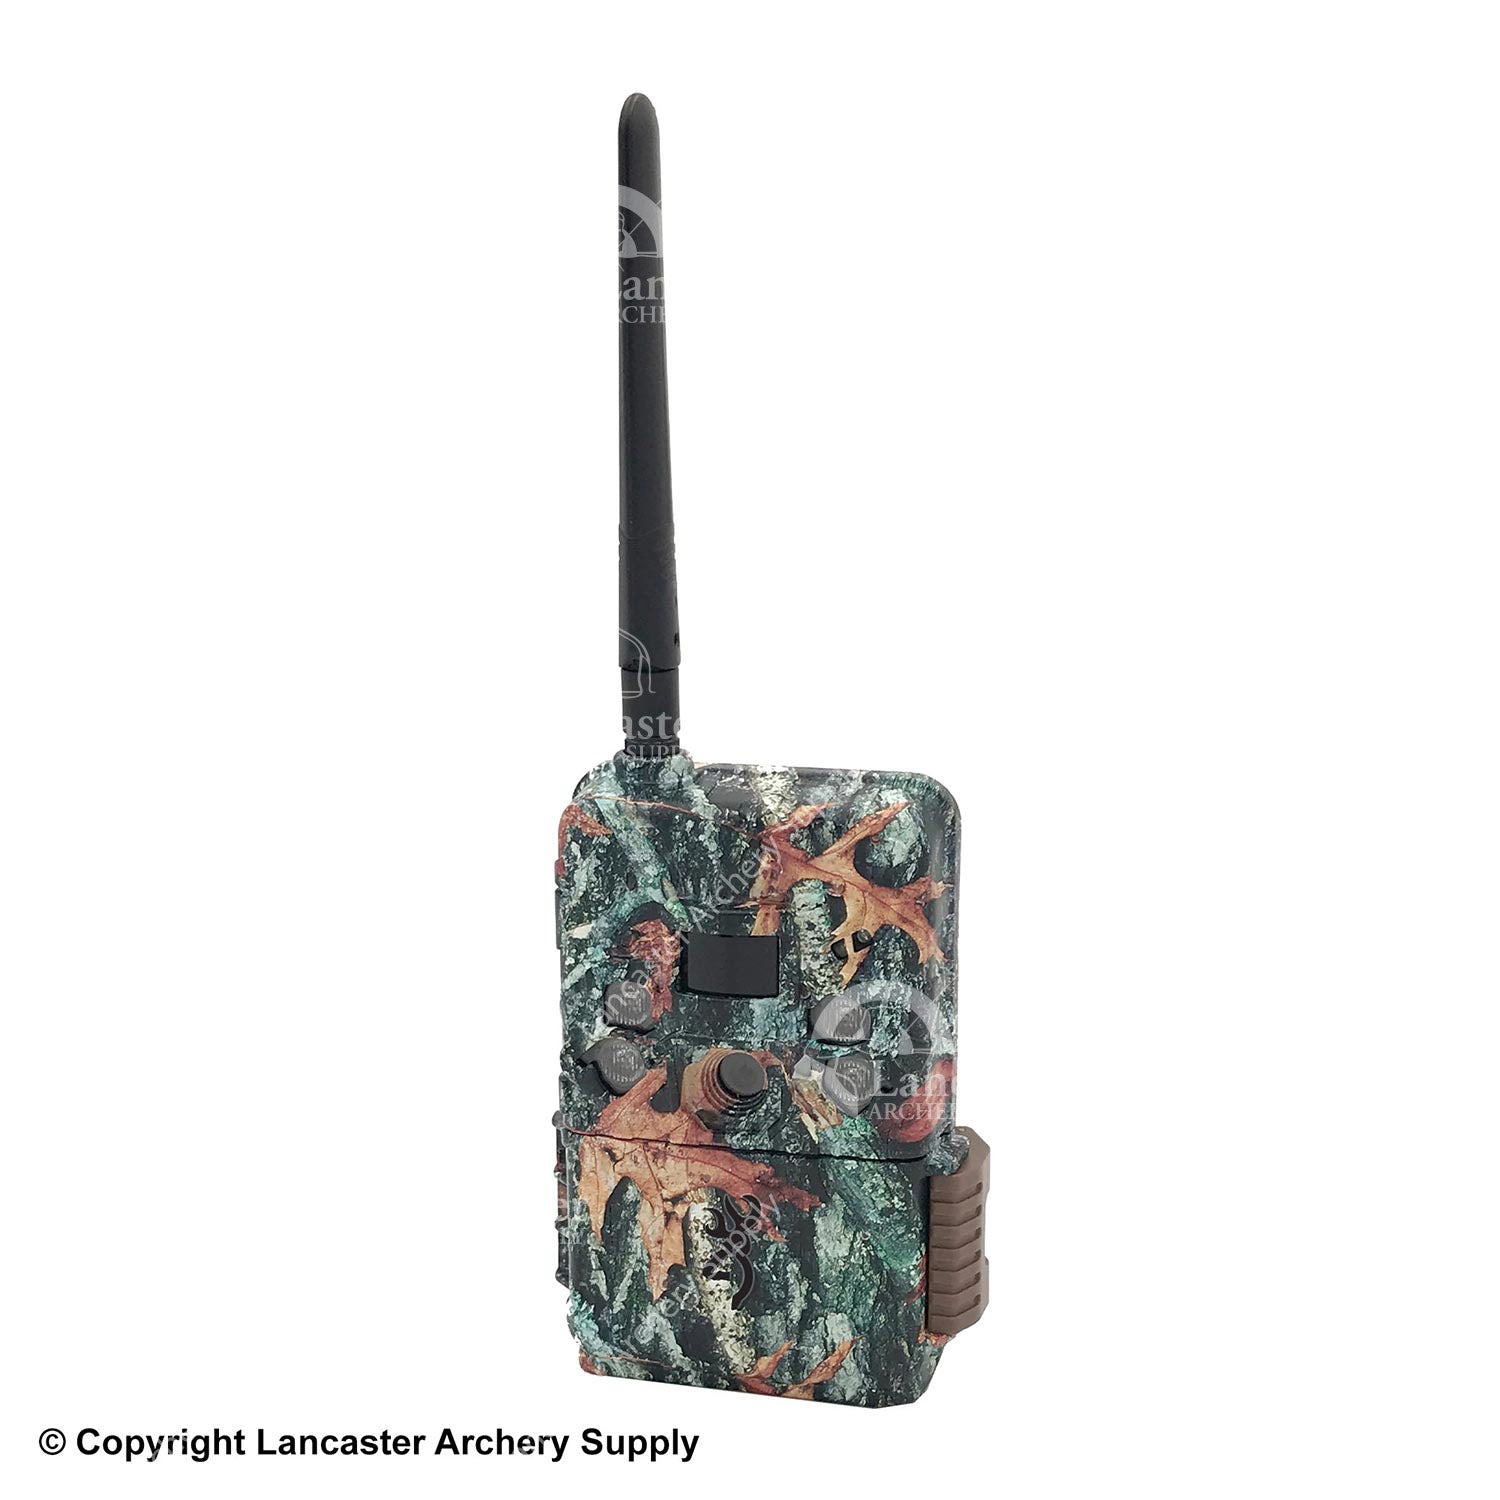 Browning Defender Pro Scout Trail Camera